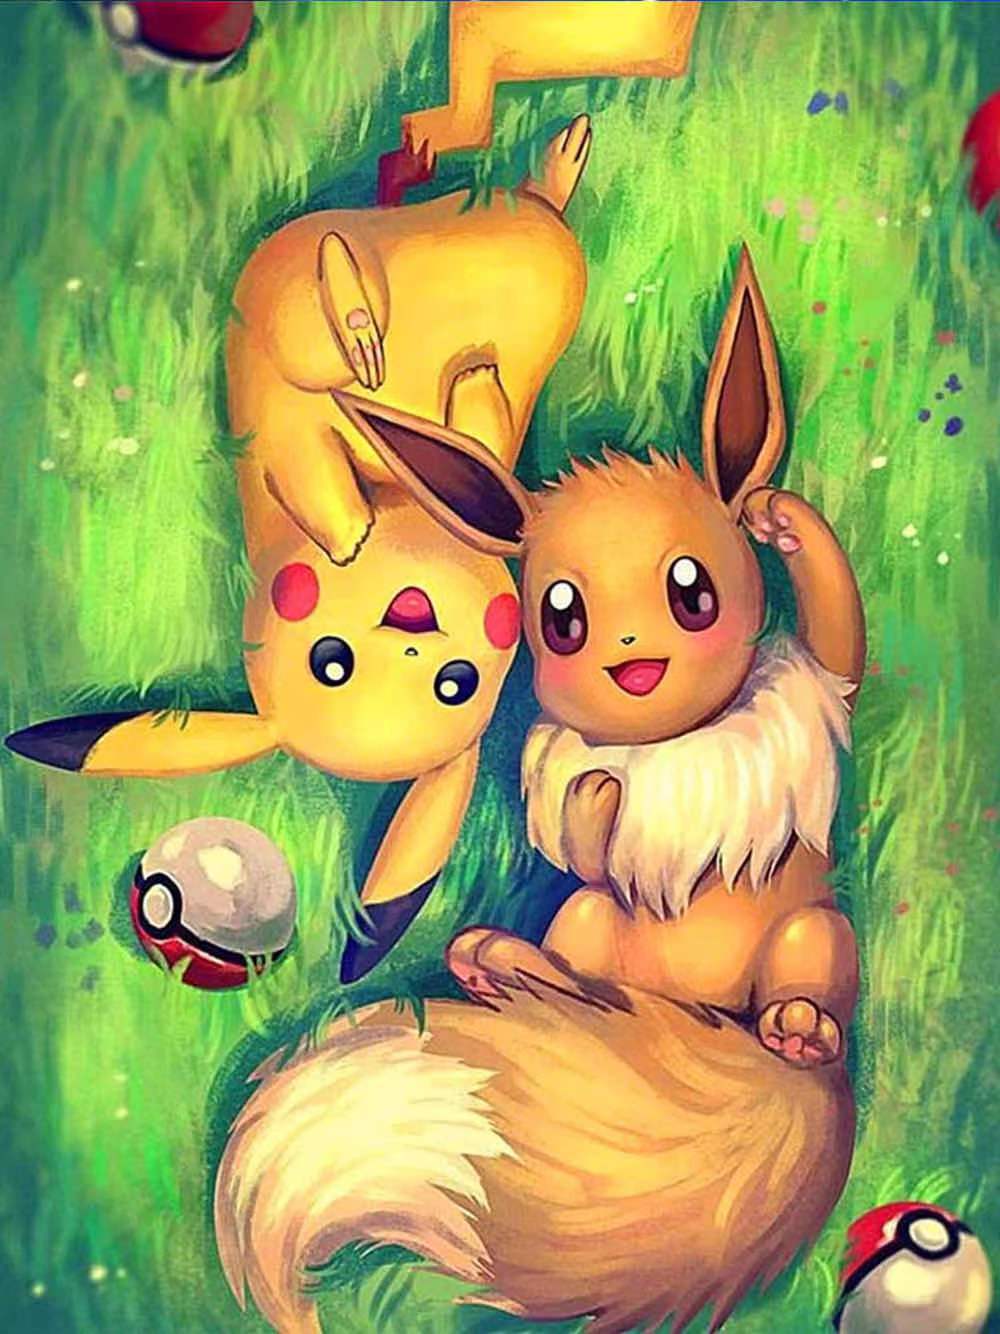 cute pokemon eevee and pikachu 15.8*11.8 inches